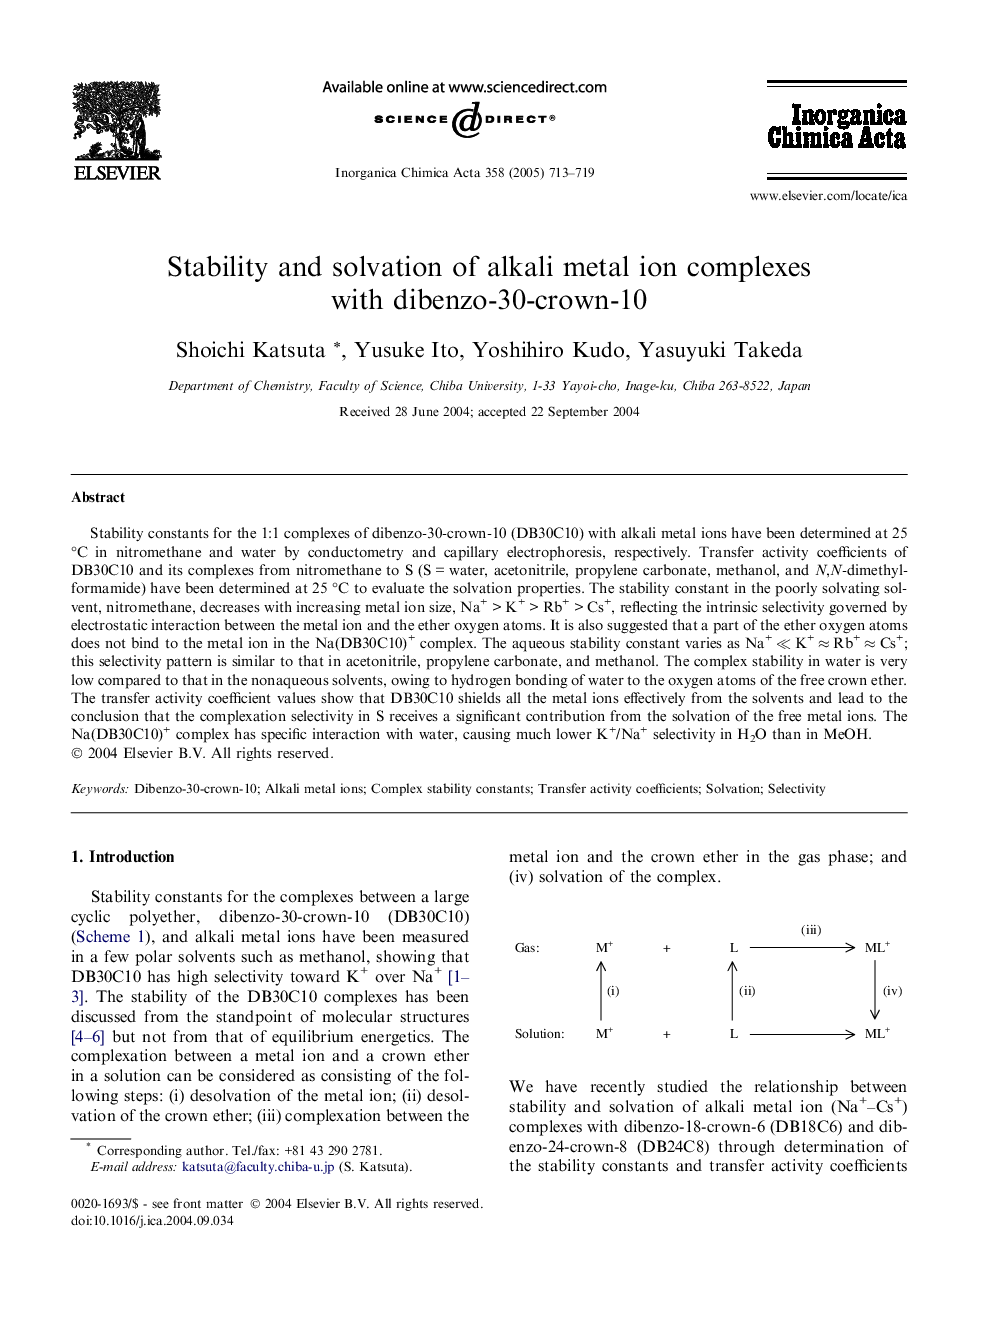 Stability and solvation of alkali metal ion complexes with dibenzo-30-crown-10